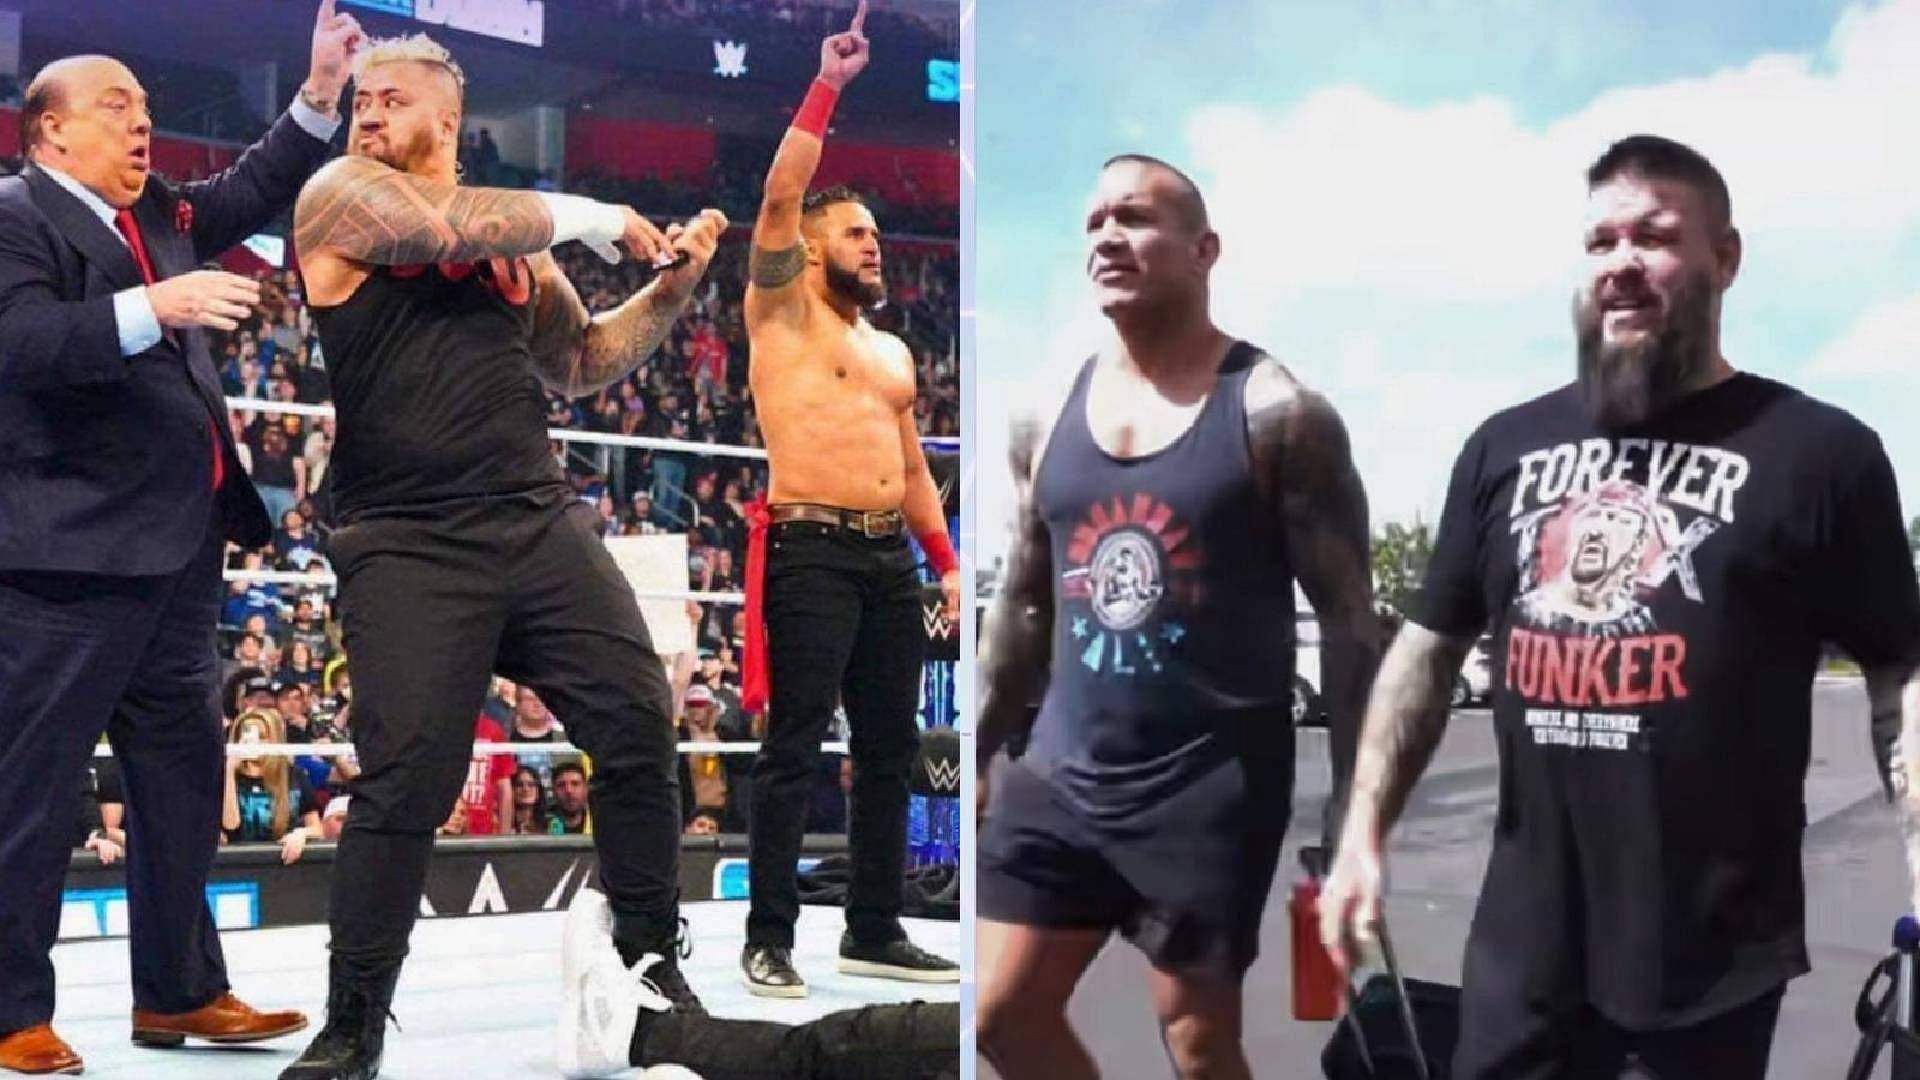 Bloodline, Randy Orton, and Kevin Owens